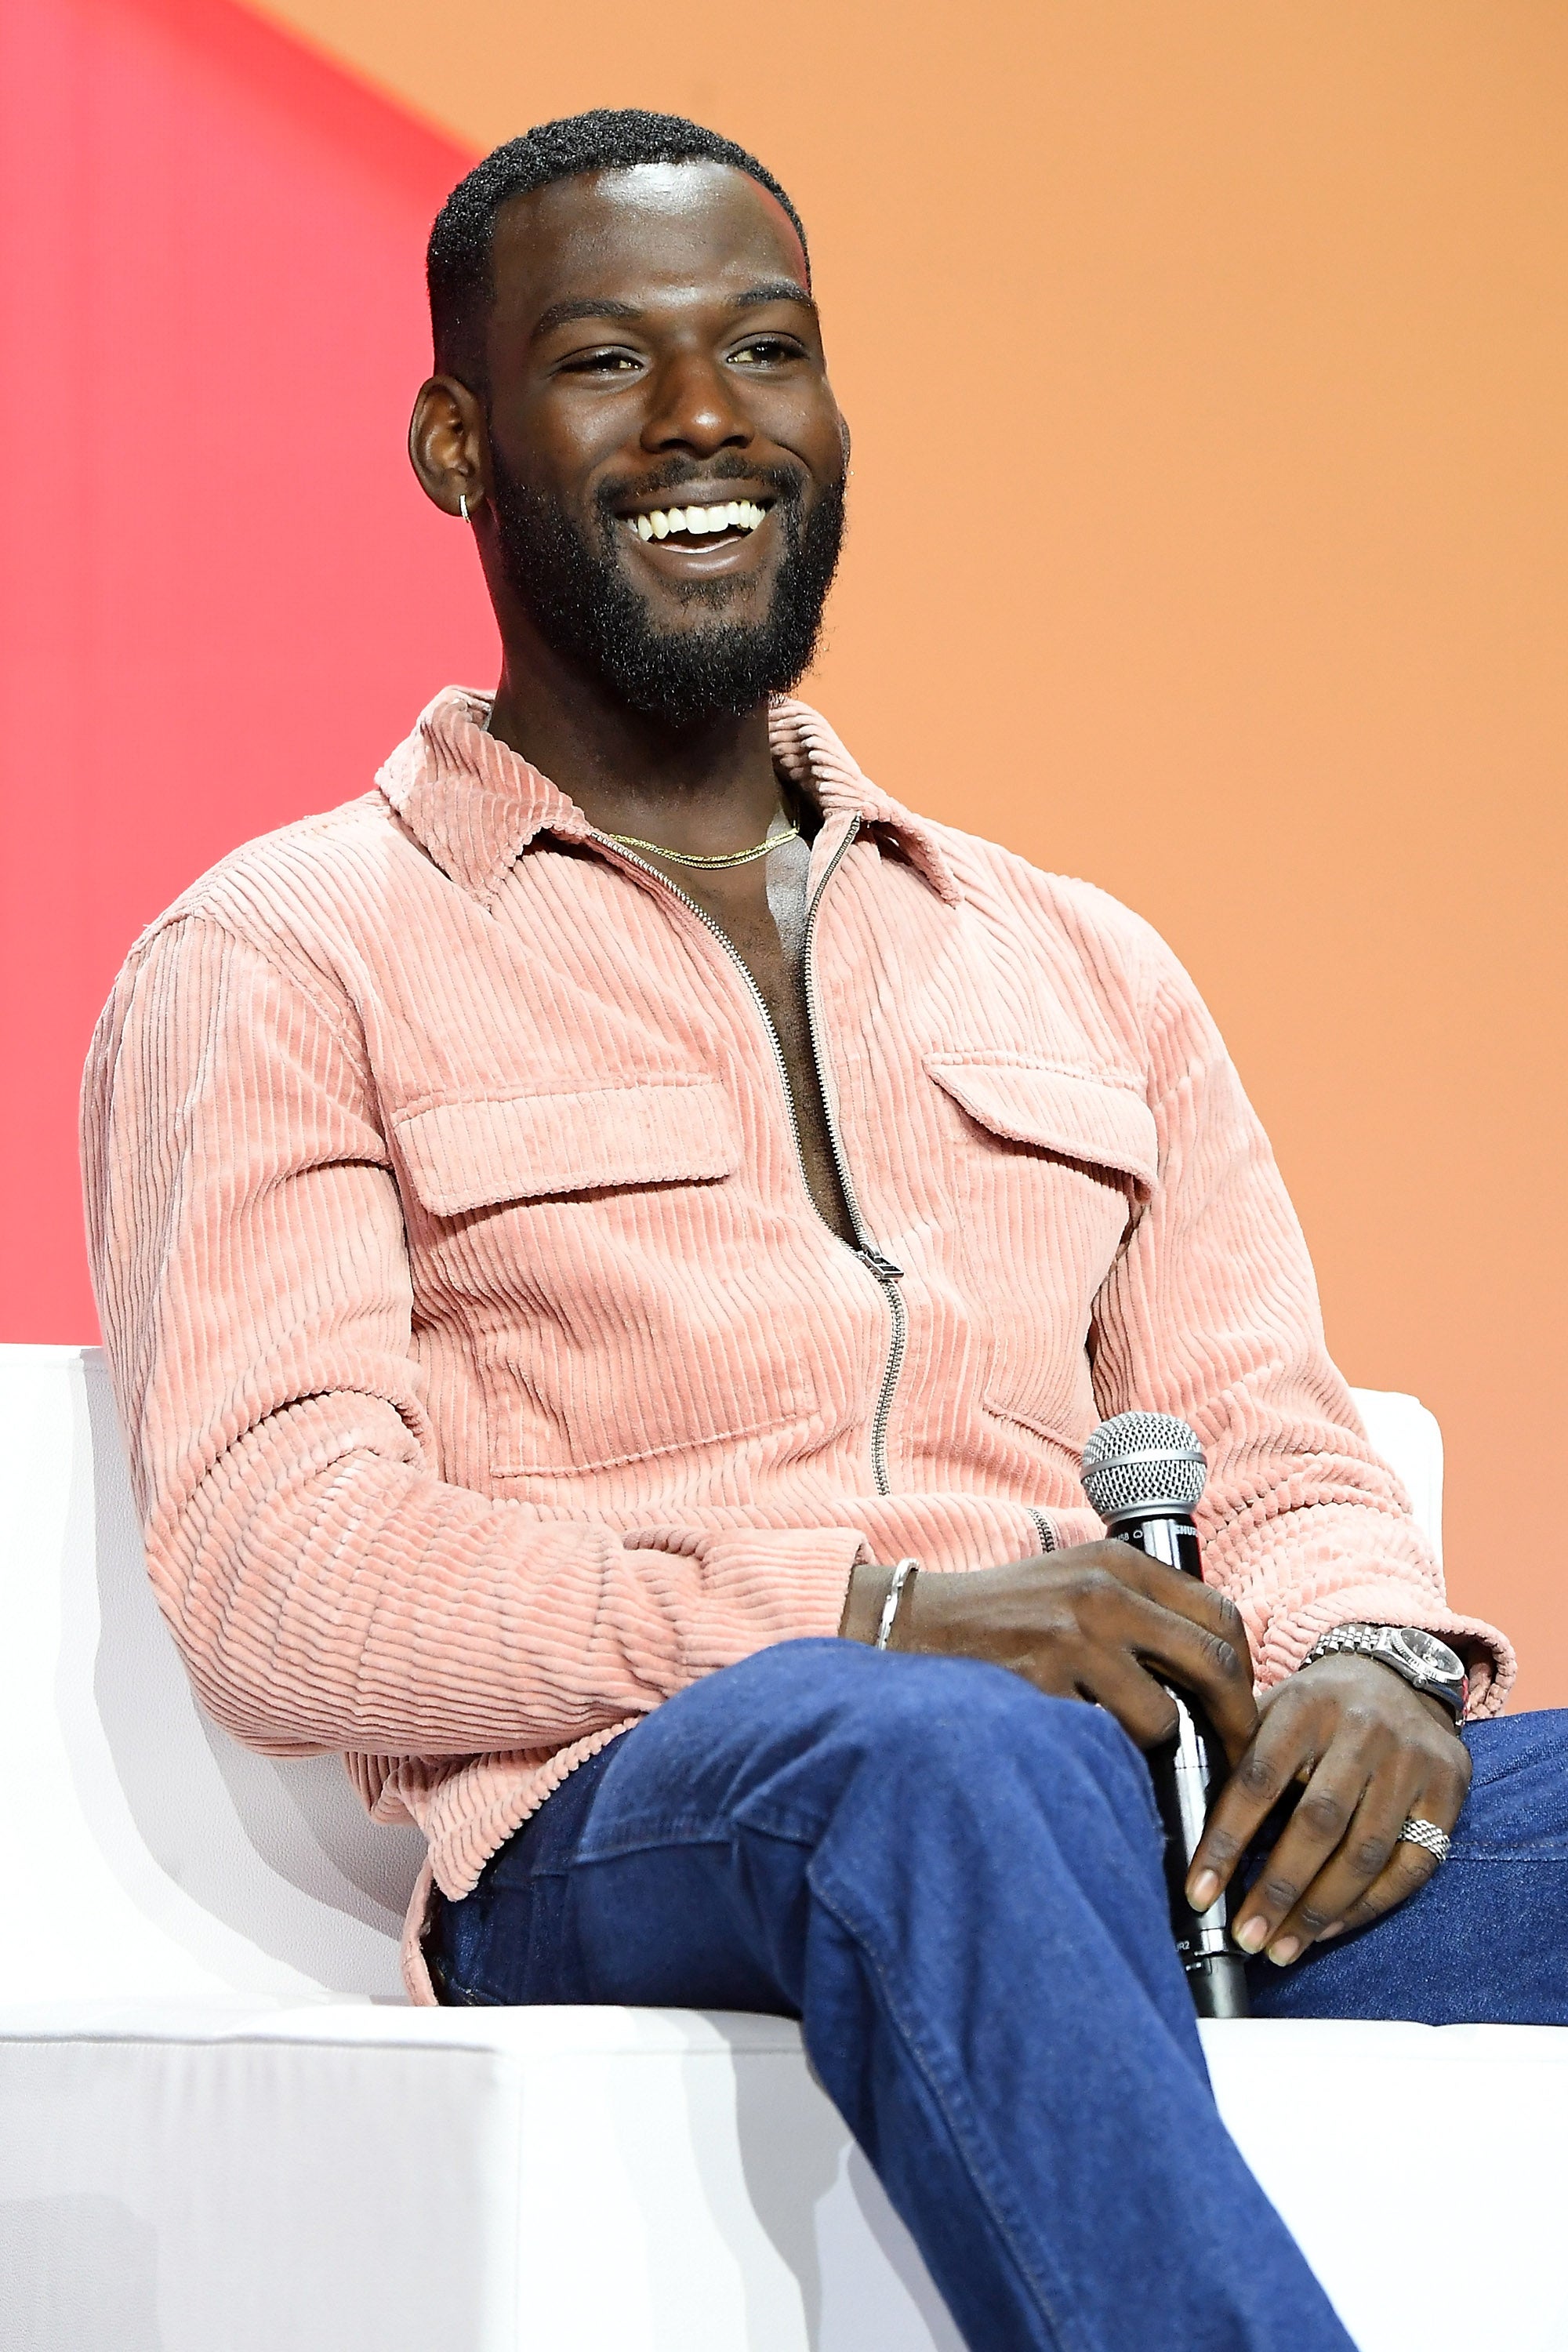 He's Fine and Smart! How Kofi Siriboe Says He's Learning To Make The Money and Not Let It Make Him